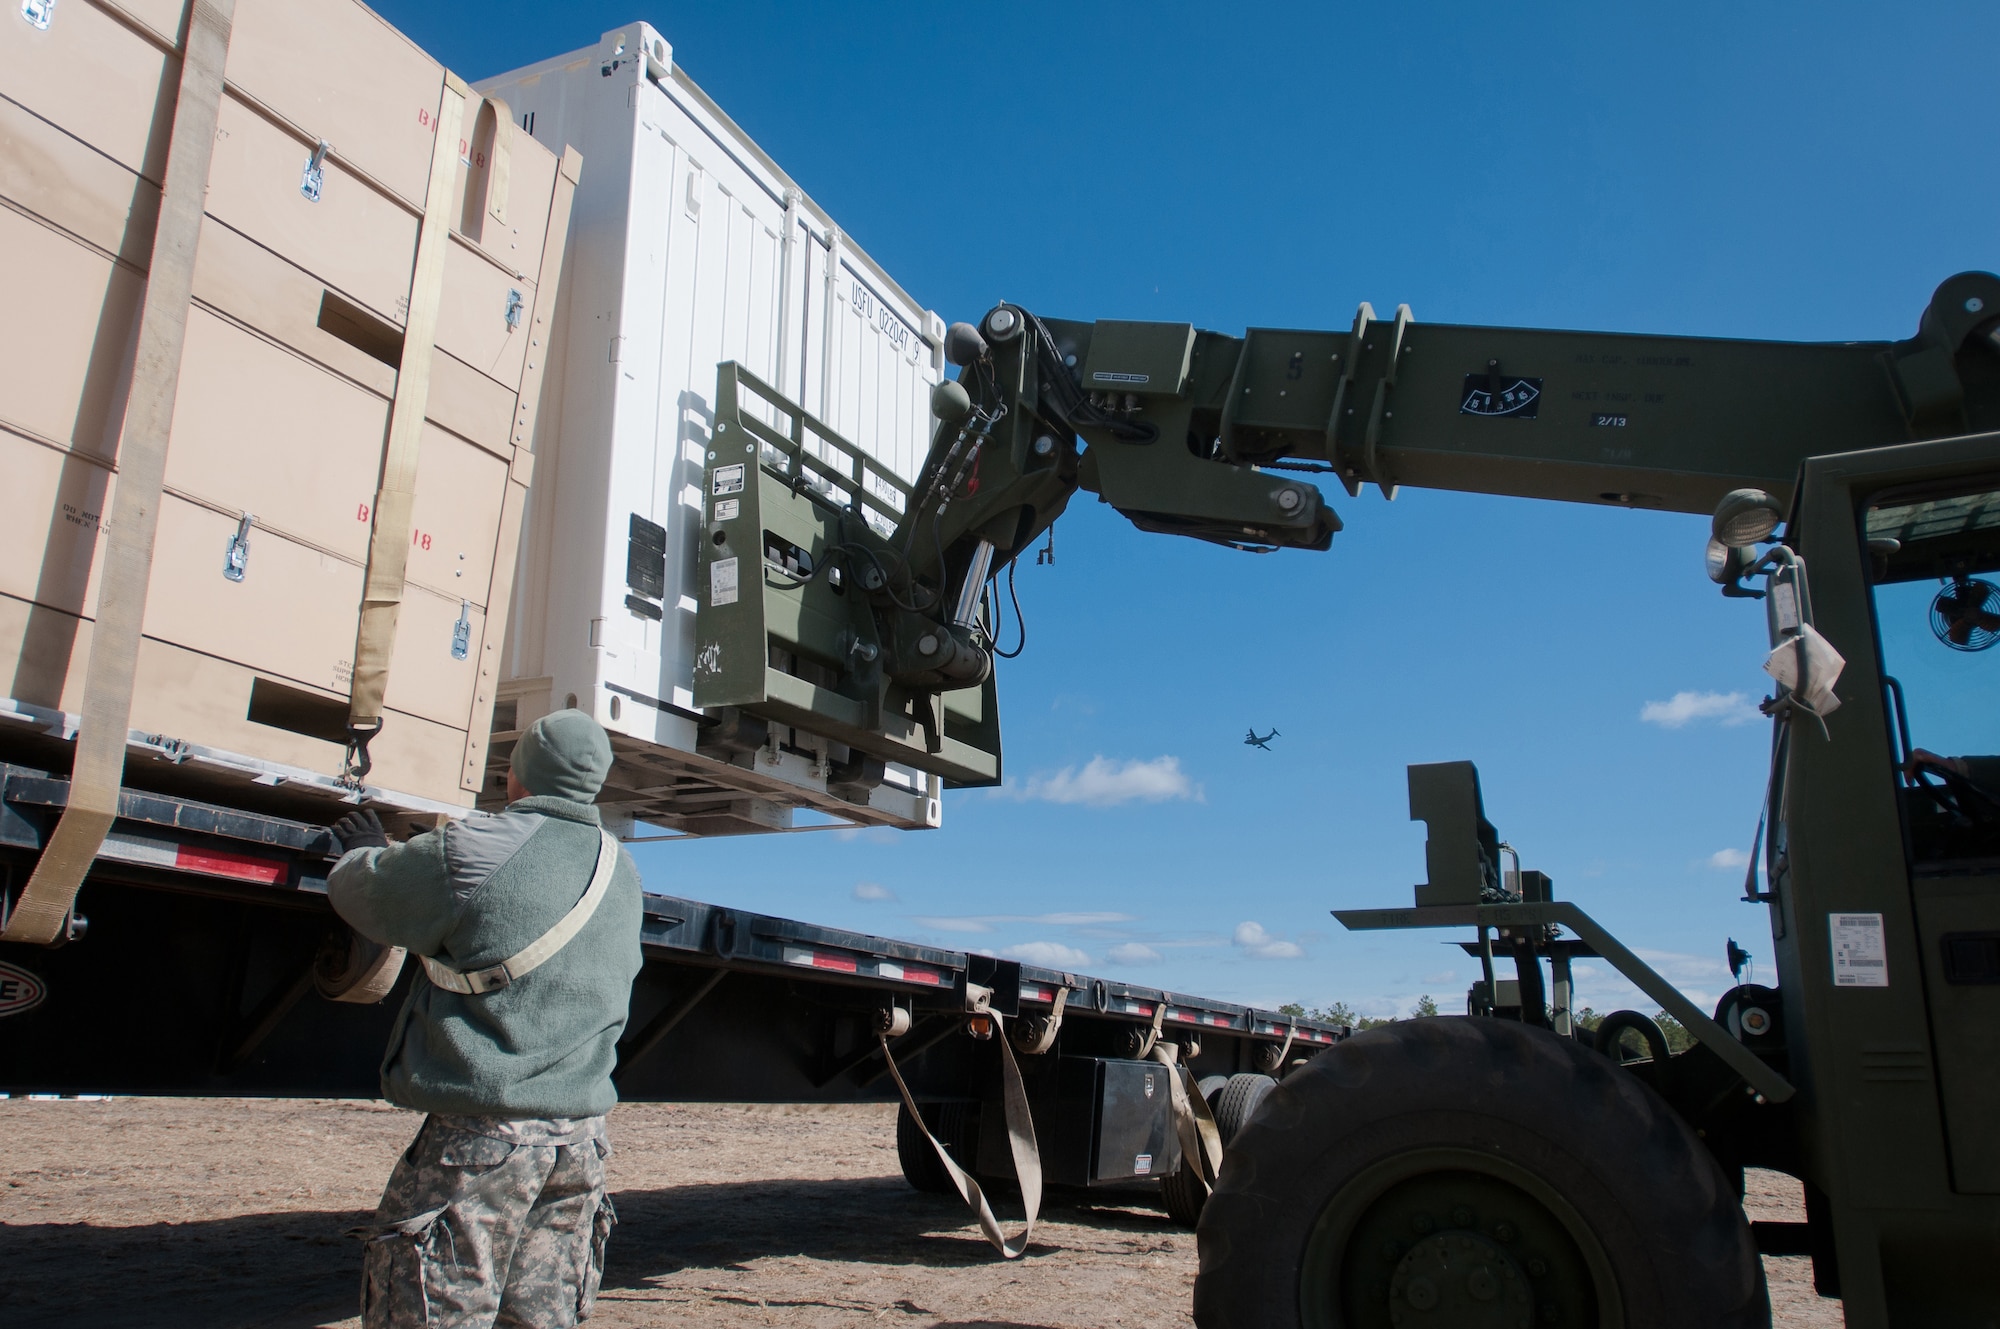 Army Sgt. Japheth Forehand, distribution NCO for the U.S. Army's 690th Rapid Port Opening Element in Fort Eustis, Va., secures a cargo container to a flatbed trailer as another is maneuvered into place and a C-17 flies overhead March 29, 2012, at Joint Base McGuire-Dix-Lakehurst, N.J. Forehand was working at the Forward Node of a Joint Task Force-Port Opening during Eagle Flag, a U.S. Air Force-sponsored exercise to prepare units for operating in deployed environments. The Kentucky Air National Guard's 123rd Contingency Response Group operated the airlift side of the JTF-PO, known as an Aerial Port of Debarkation. (U.S. Air Force photo by Maj. Dale Greer)